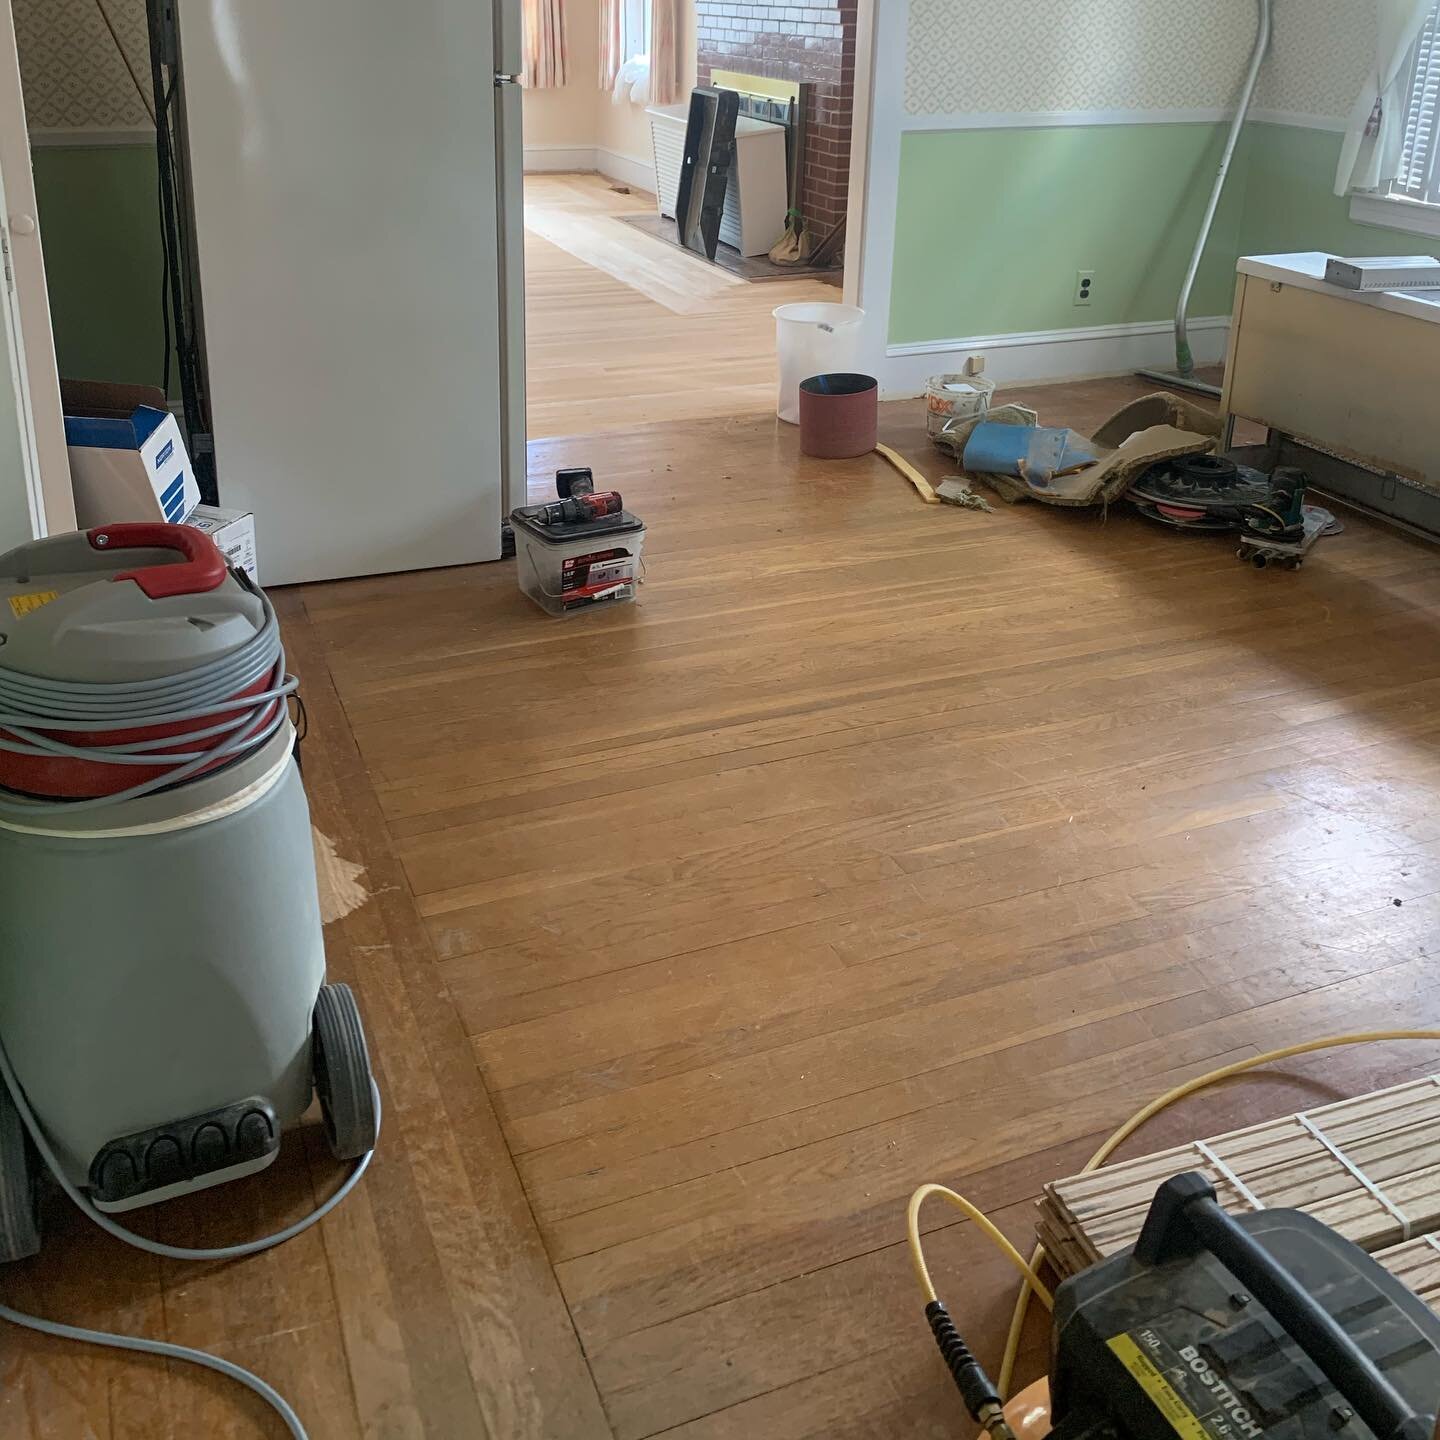 Brand new floors in the kitchen and resurfaced the rest of the house . Gloss looking beautiful shine!!! #OneBoardAtaTime #gq #gqhardwoodfloorsinc #providencia #ri #providence #hardwoodfloors #business #entrepreneur #contractorlife